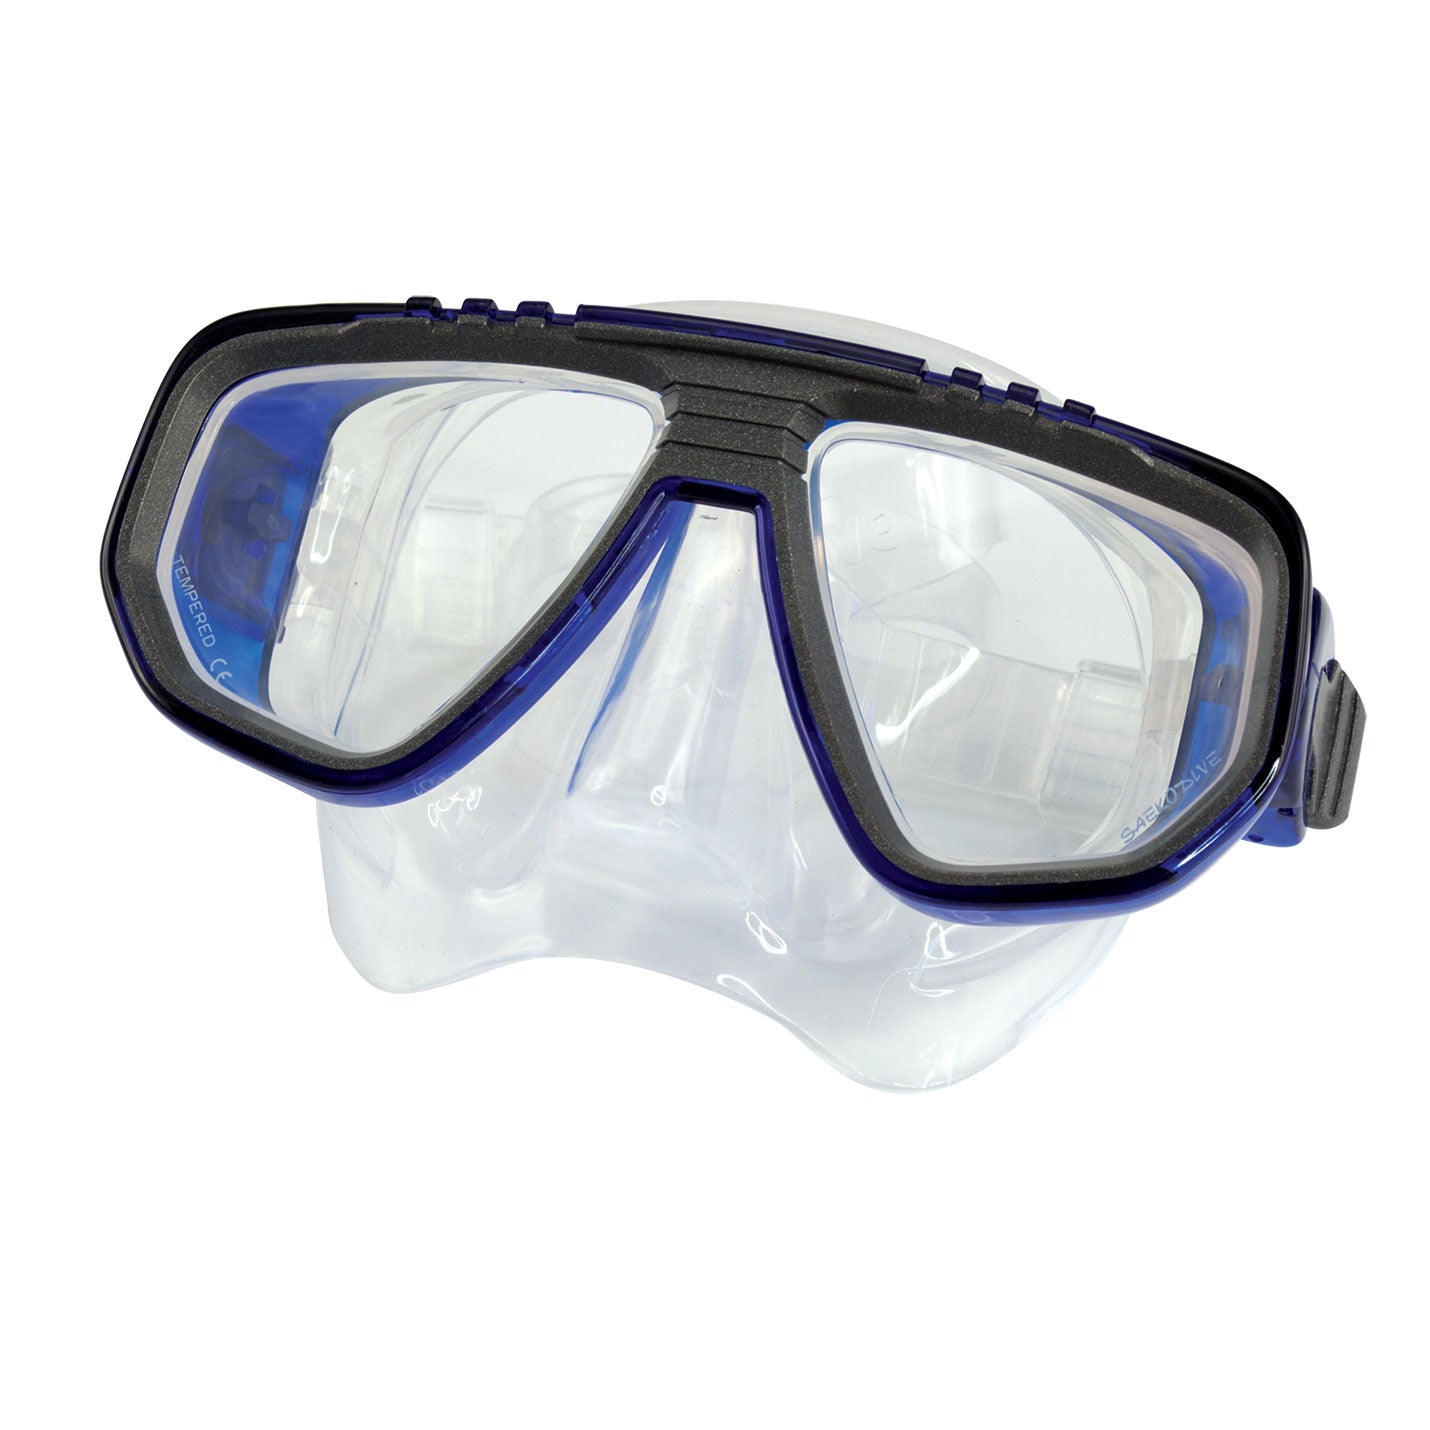 RX Diving Mask